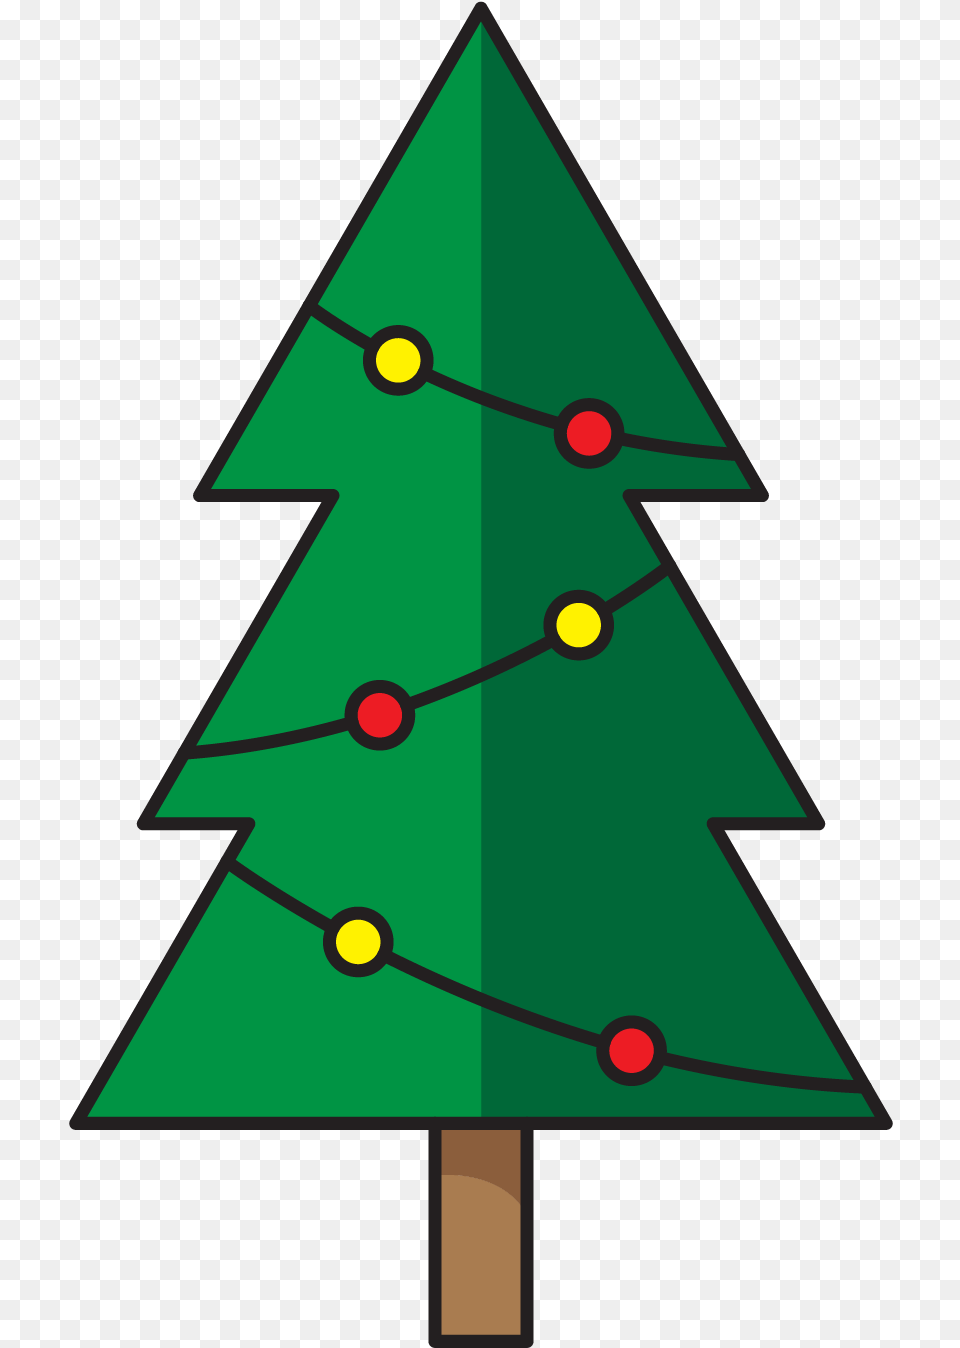 Christmas Tree Icon Graphic New Year Tree, Triangle, Festival, Christmas Decorations, Device Png